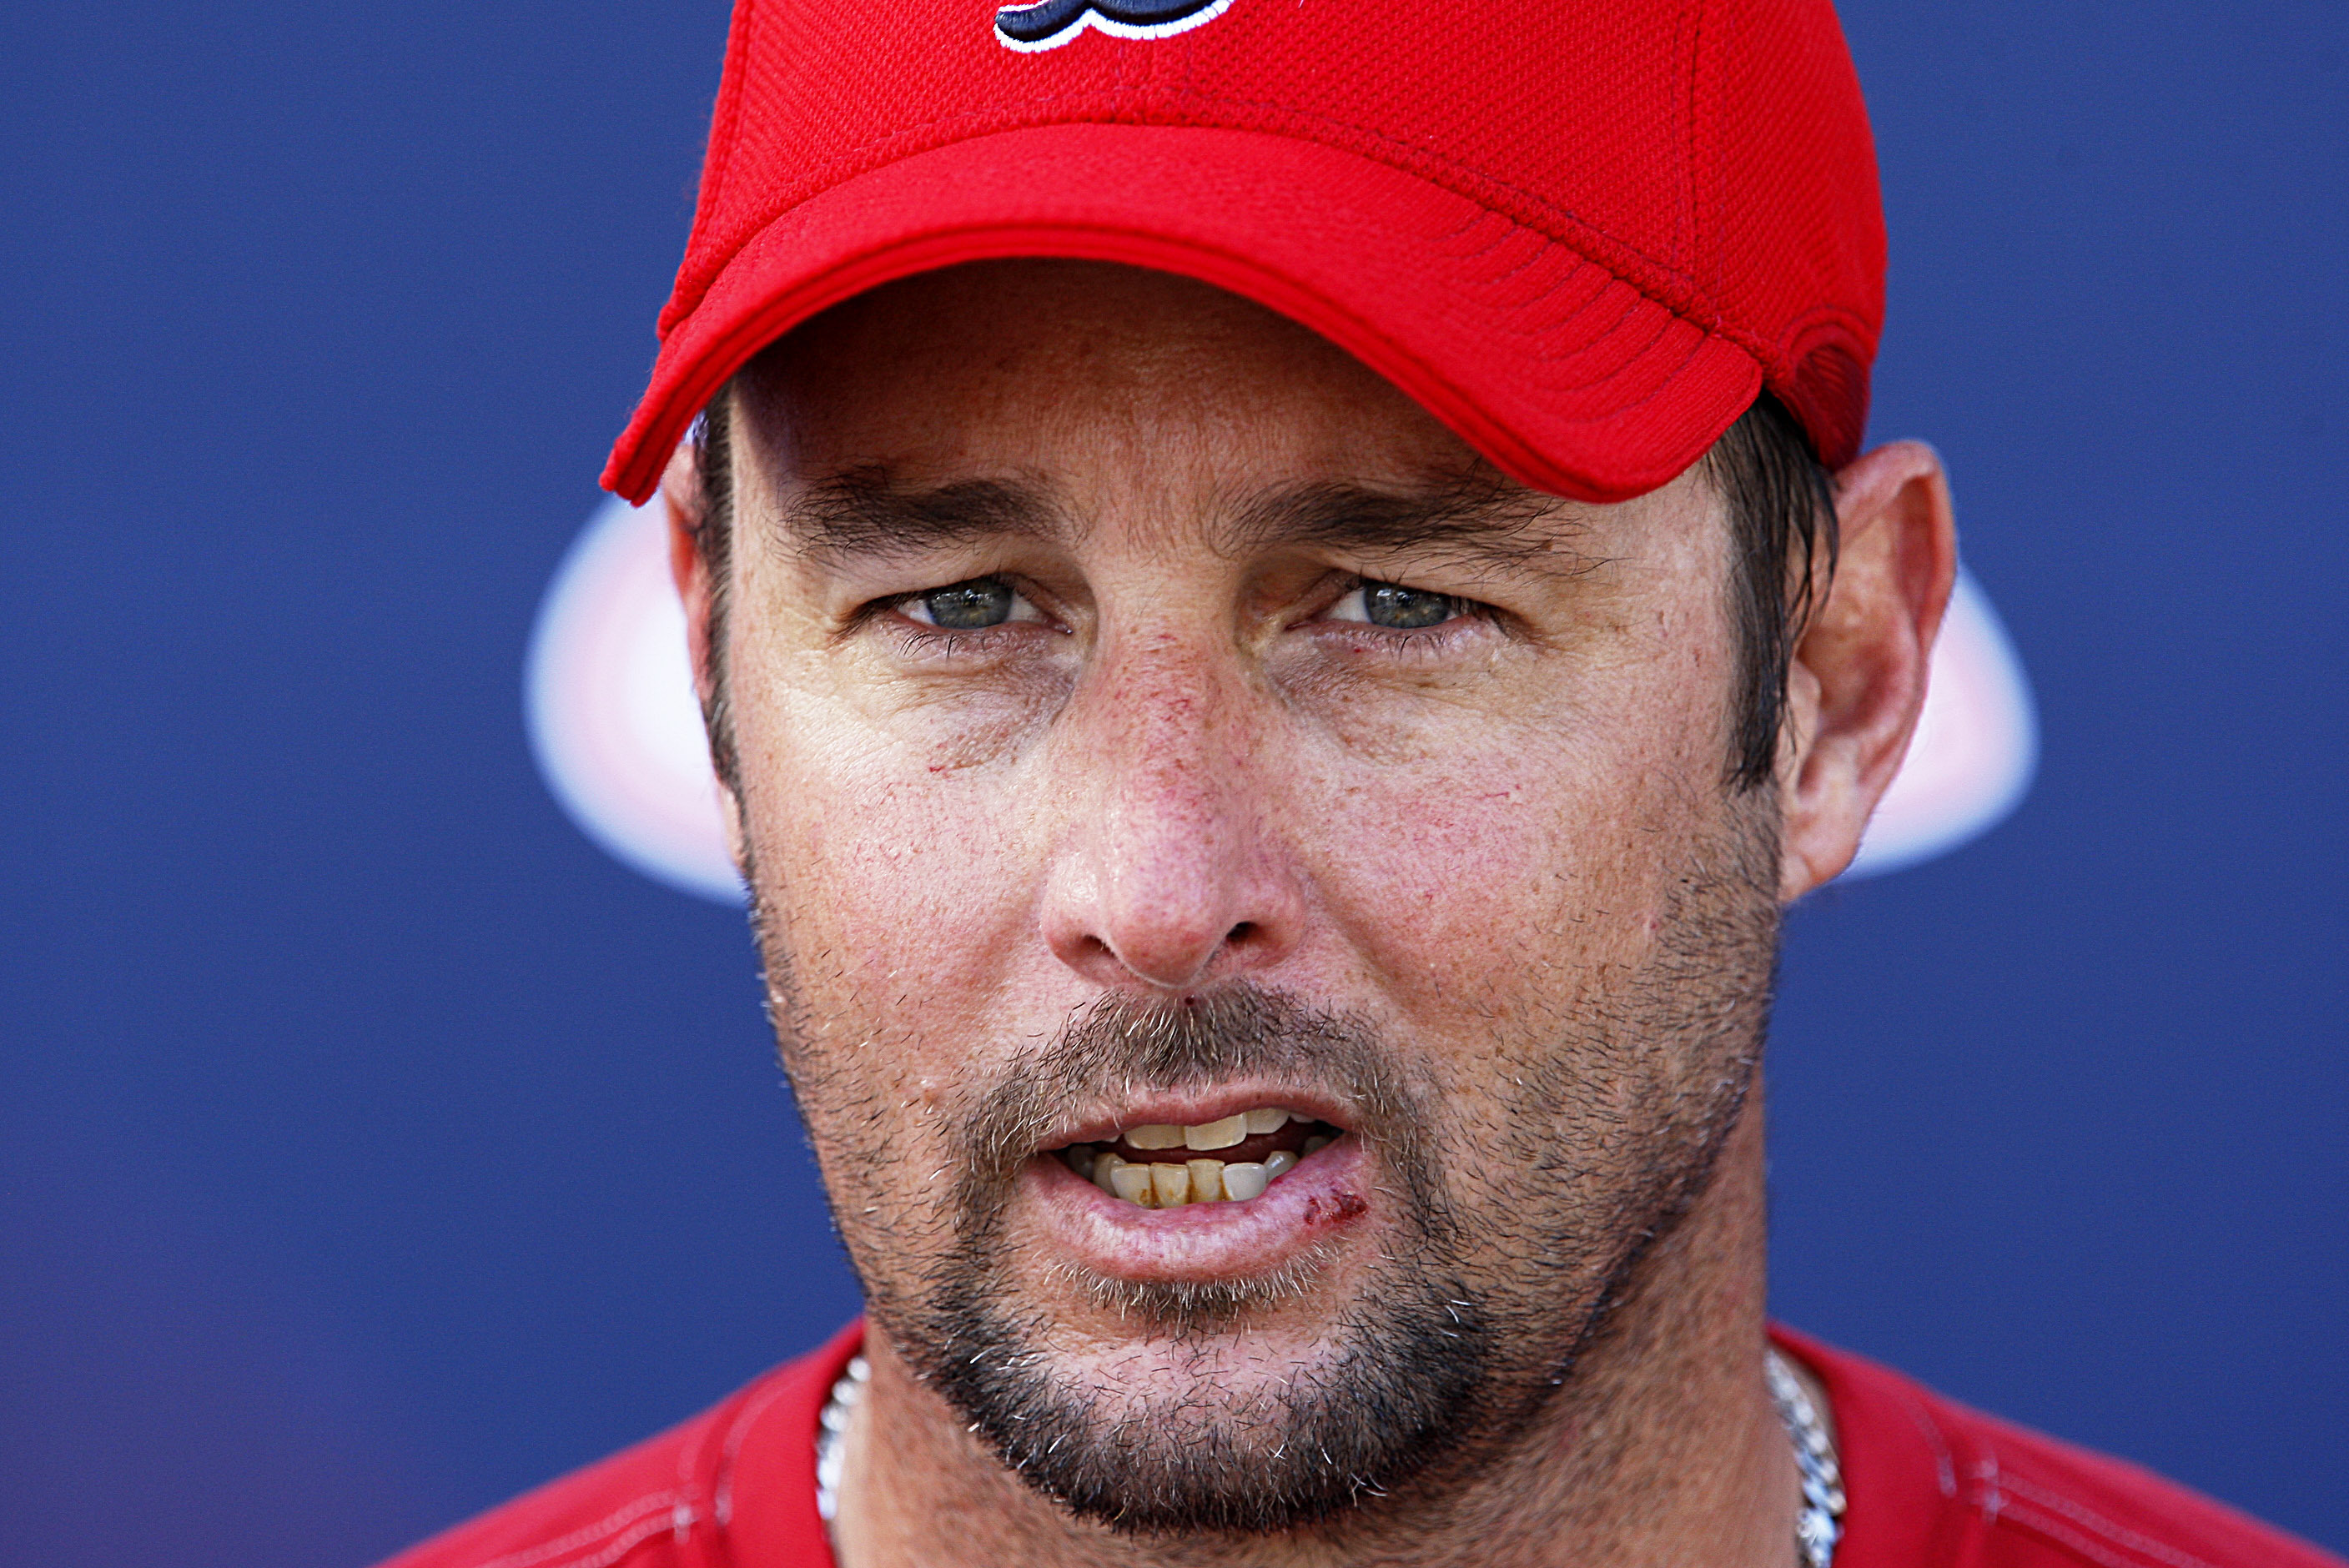 Tim Wakefield at Red Sox spring training in Ft. Myers, Florida on February 12, 2009 | Source: Getty Images